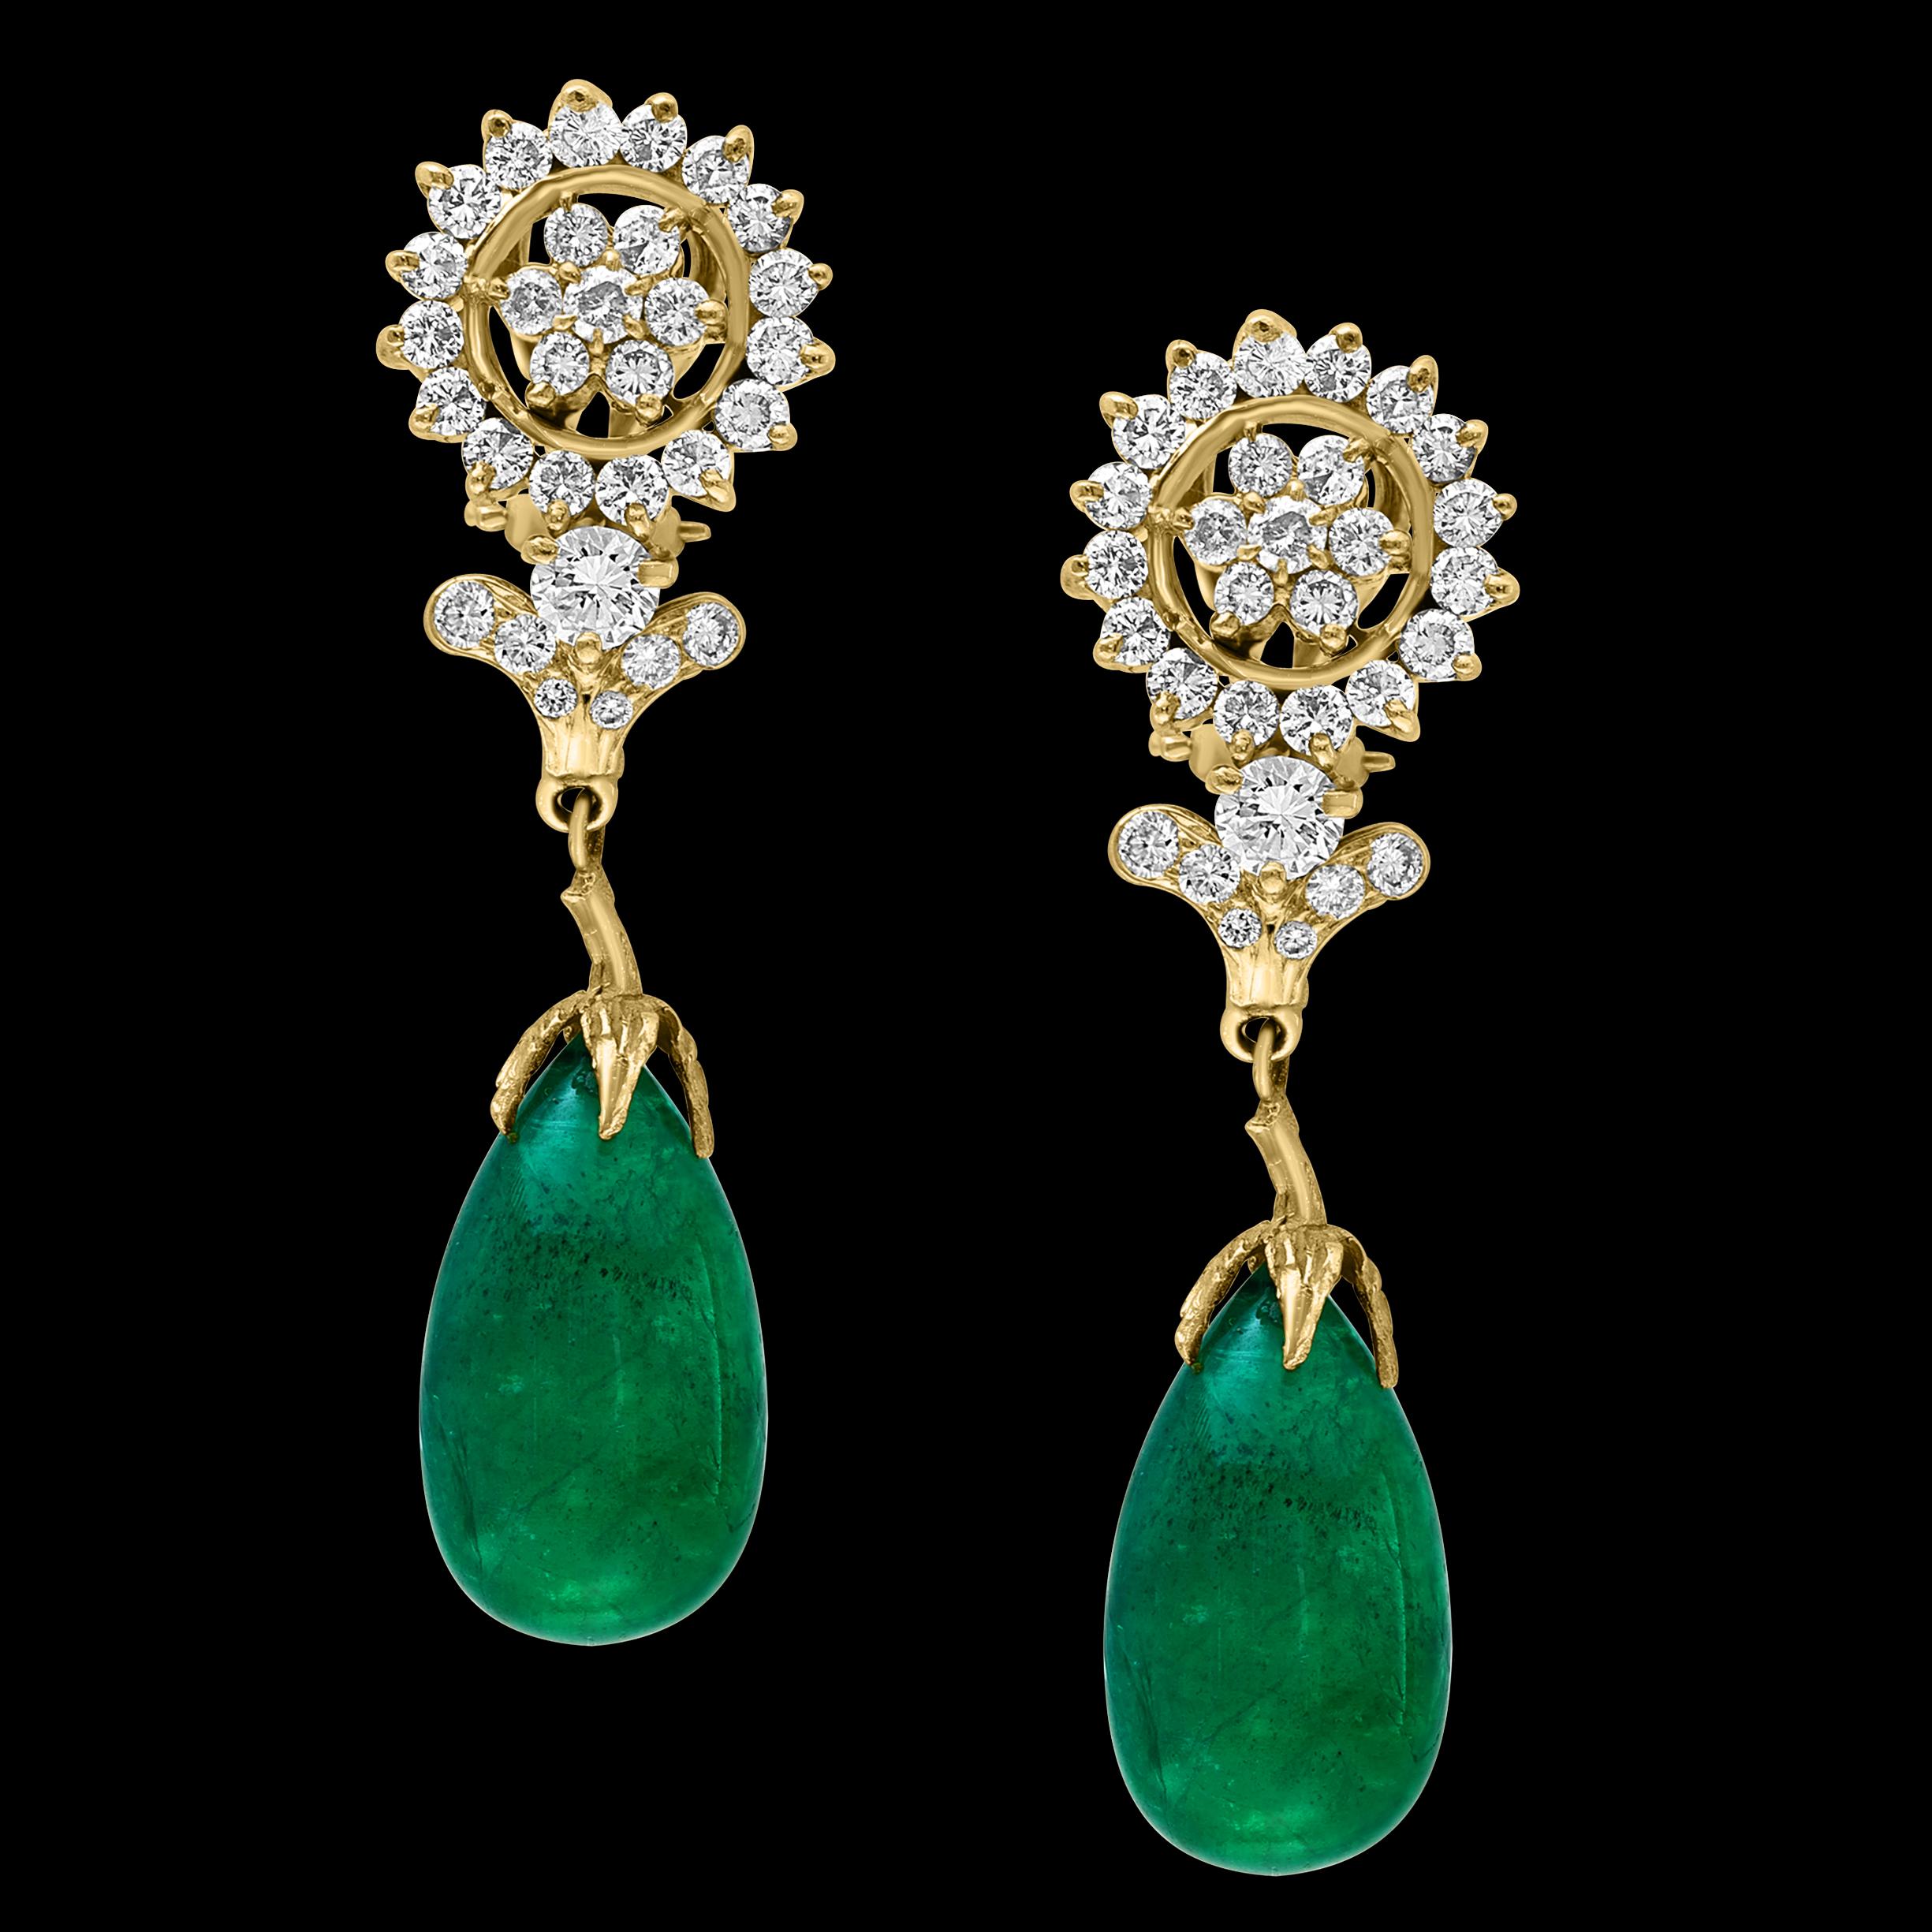 GIA Certified 28 Ct Emerald  Cabochon & Diamond Drops Hanging Earrings 14 KYG
This exquisite pair of earrings are beautifully crafted with 14 karat yellow gold  weighing 14 grams
Two fine  Cabochon Emerald   weighing approximately 14 carats each